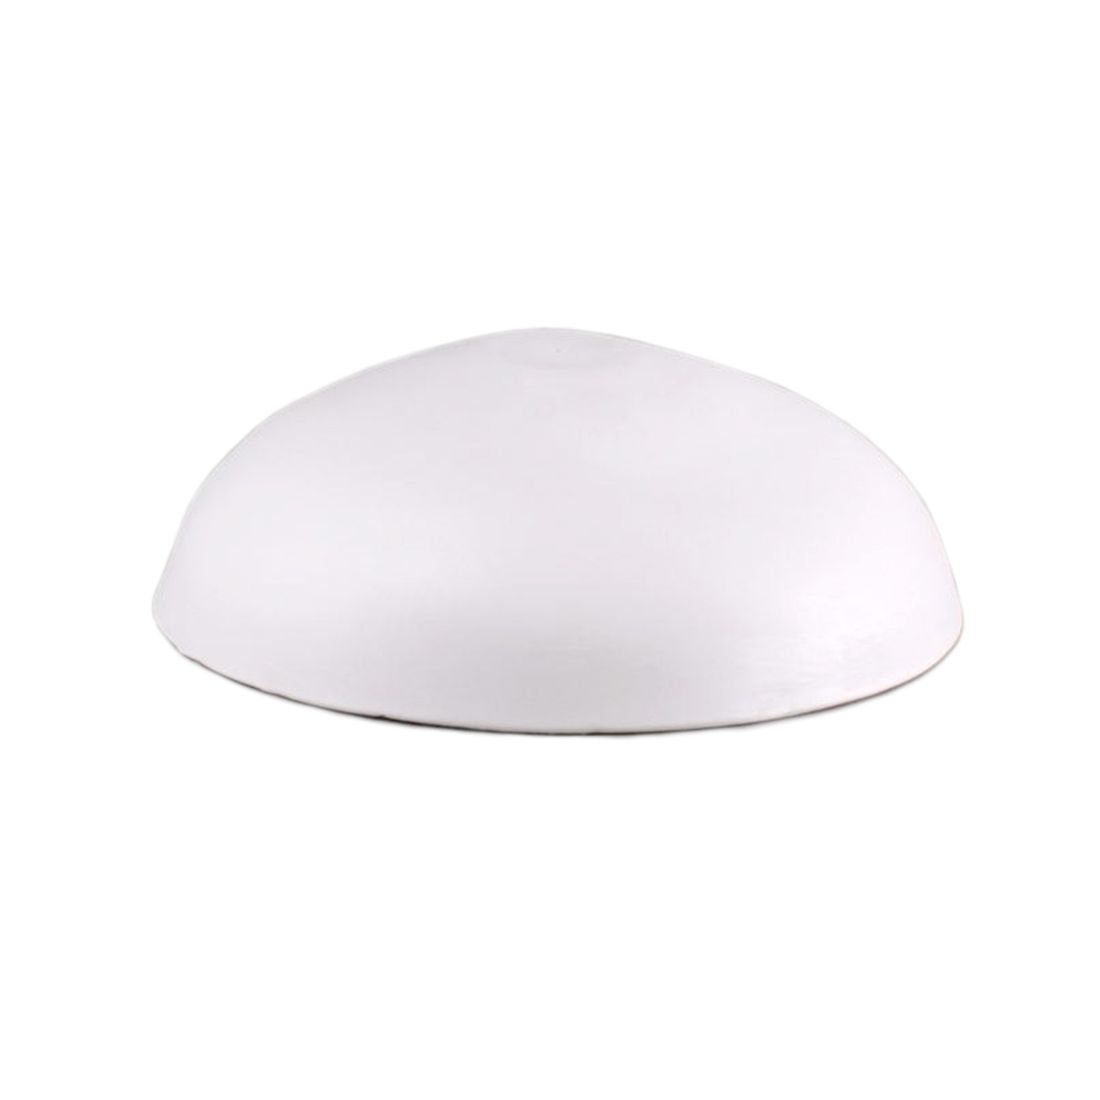 DOME CAP MOLD - FLAT by CPI